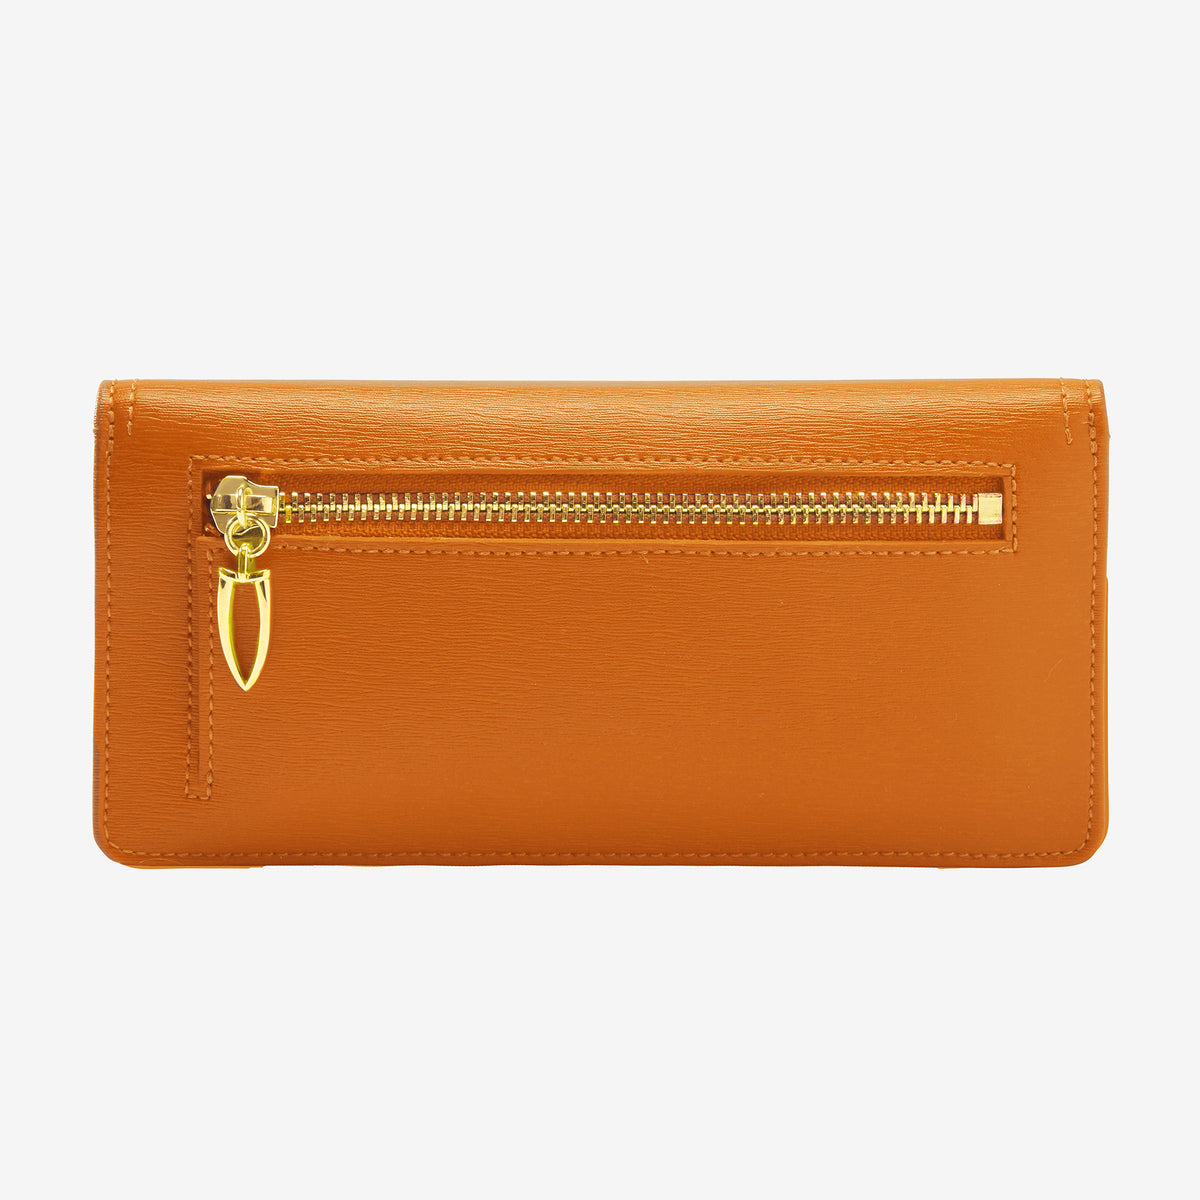 Madison | Gusseted Wallet-Tusk